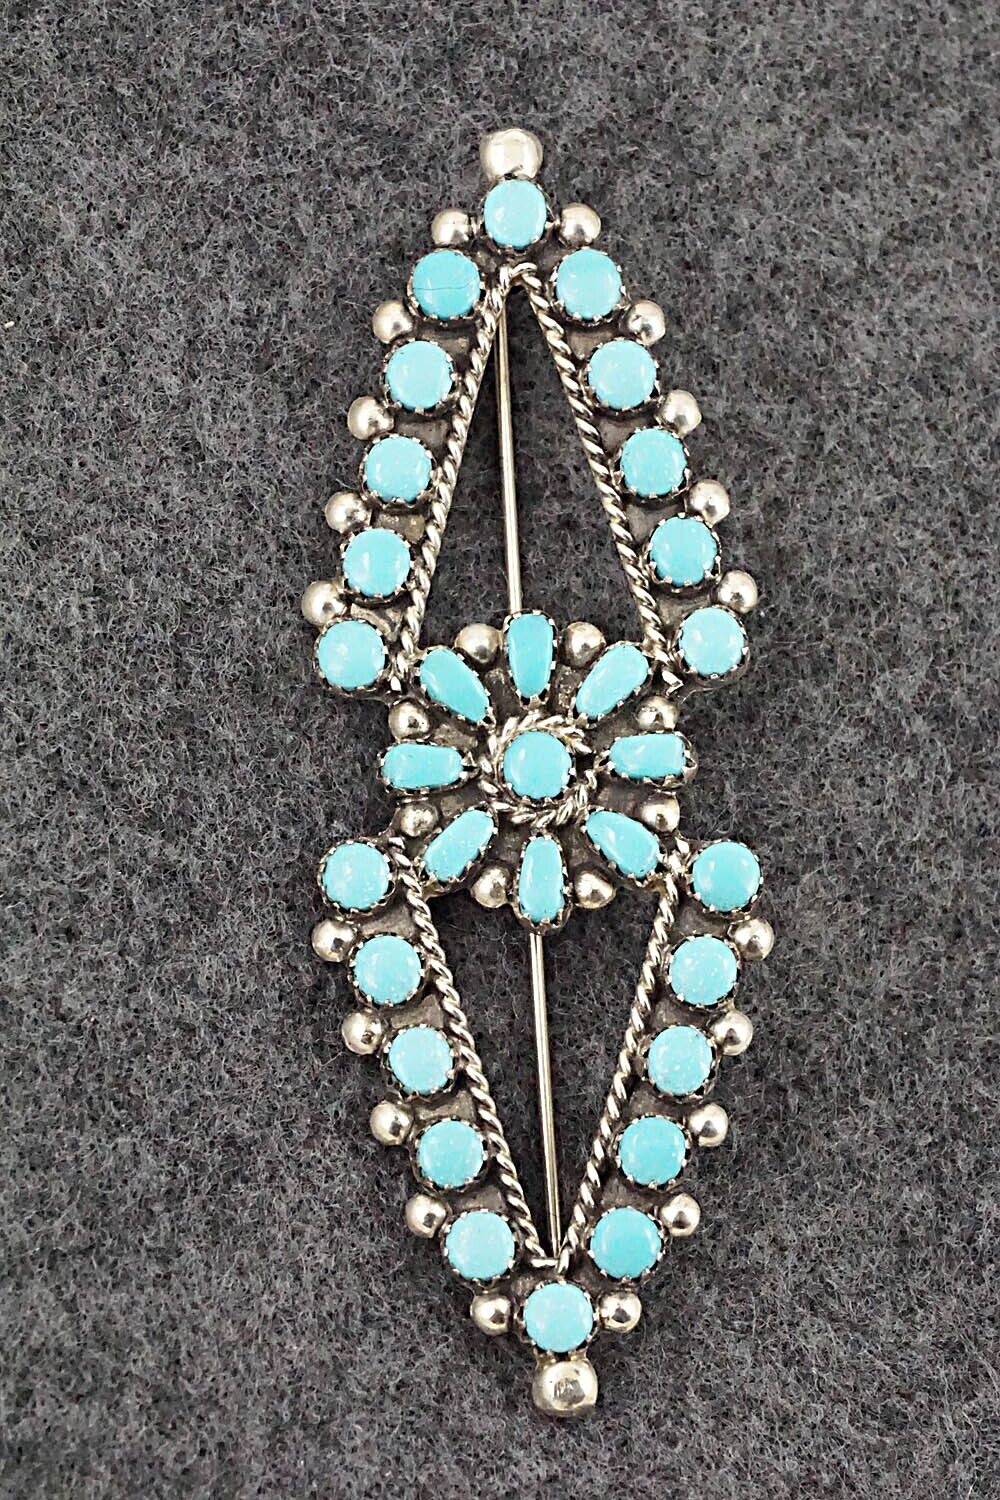 Turquoise & Sterling Silver Pin - E. Gchachu